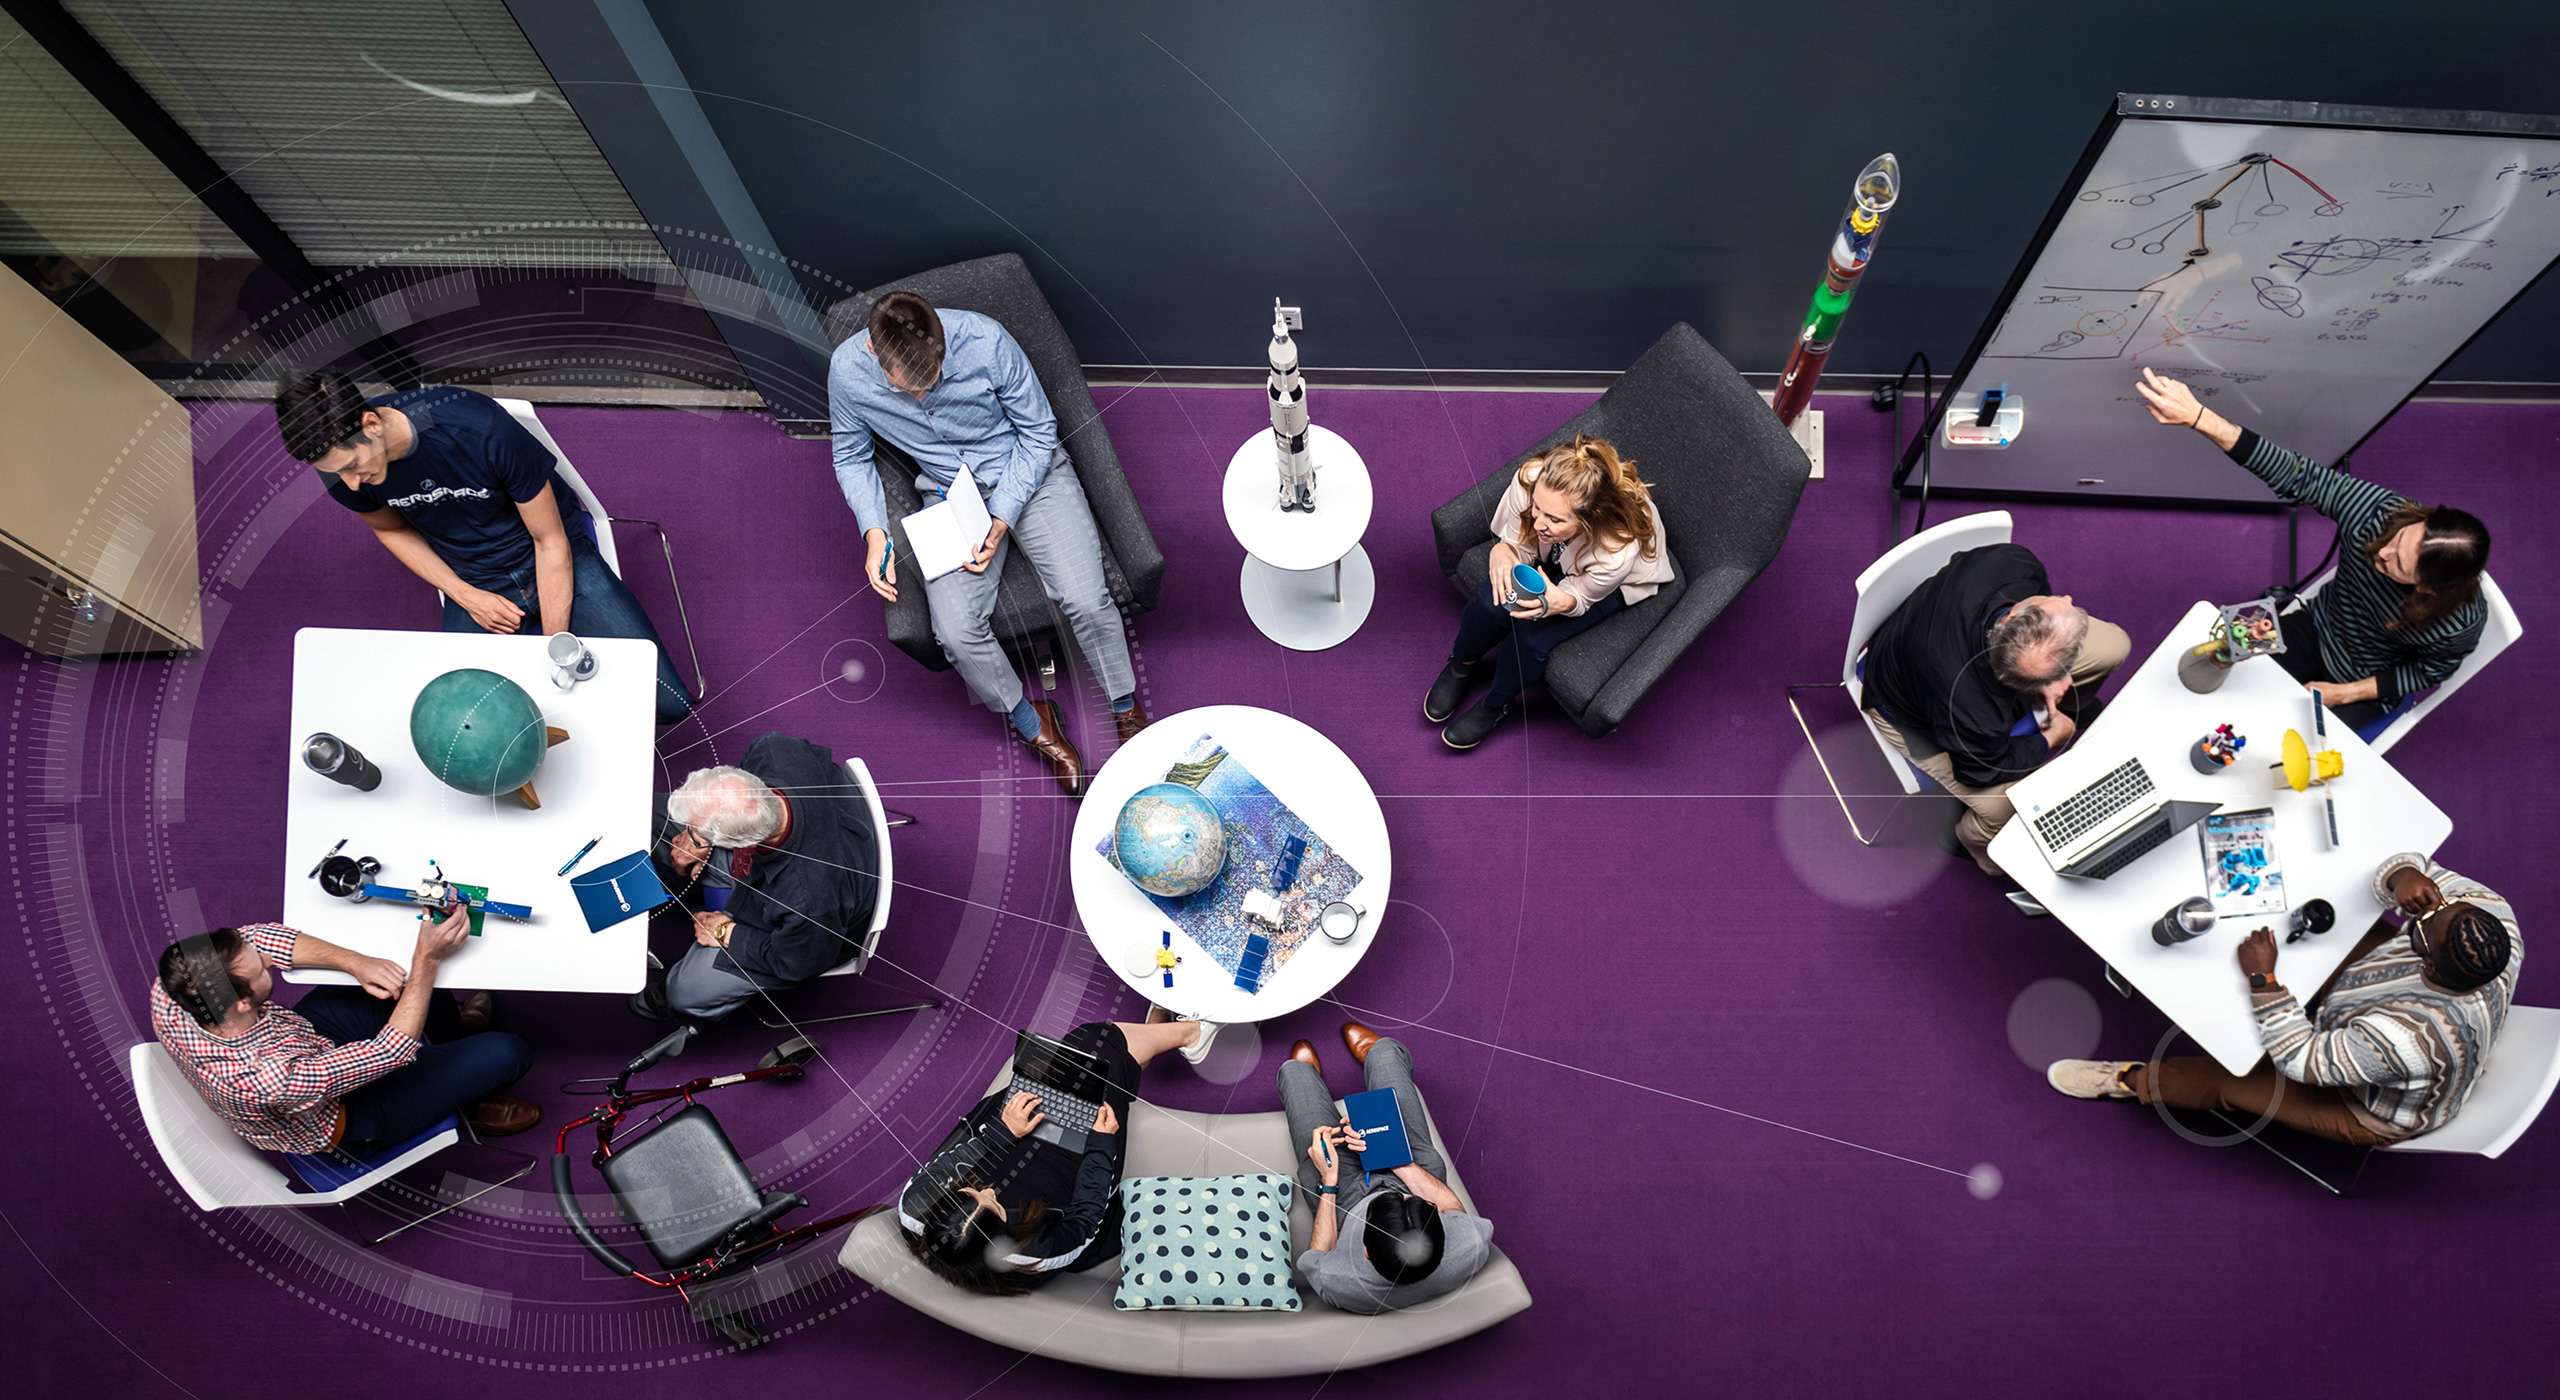 Top view photo of people collaborating in a collaboration space.